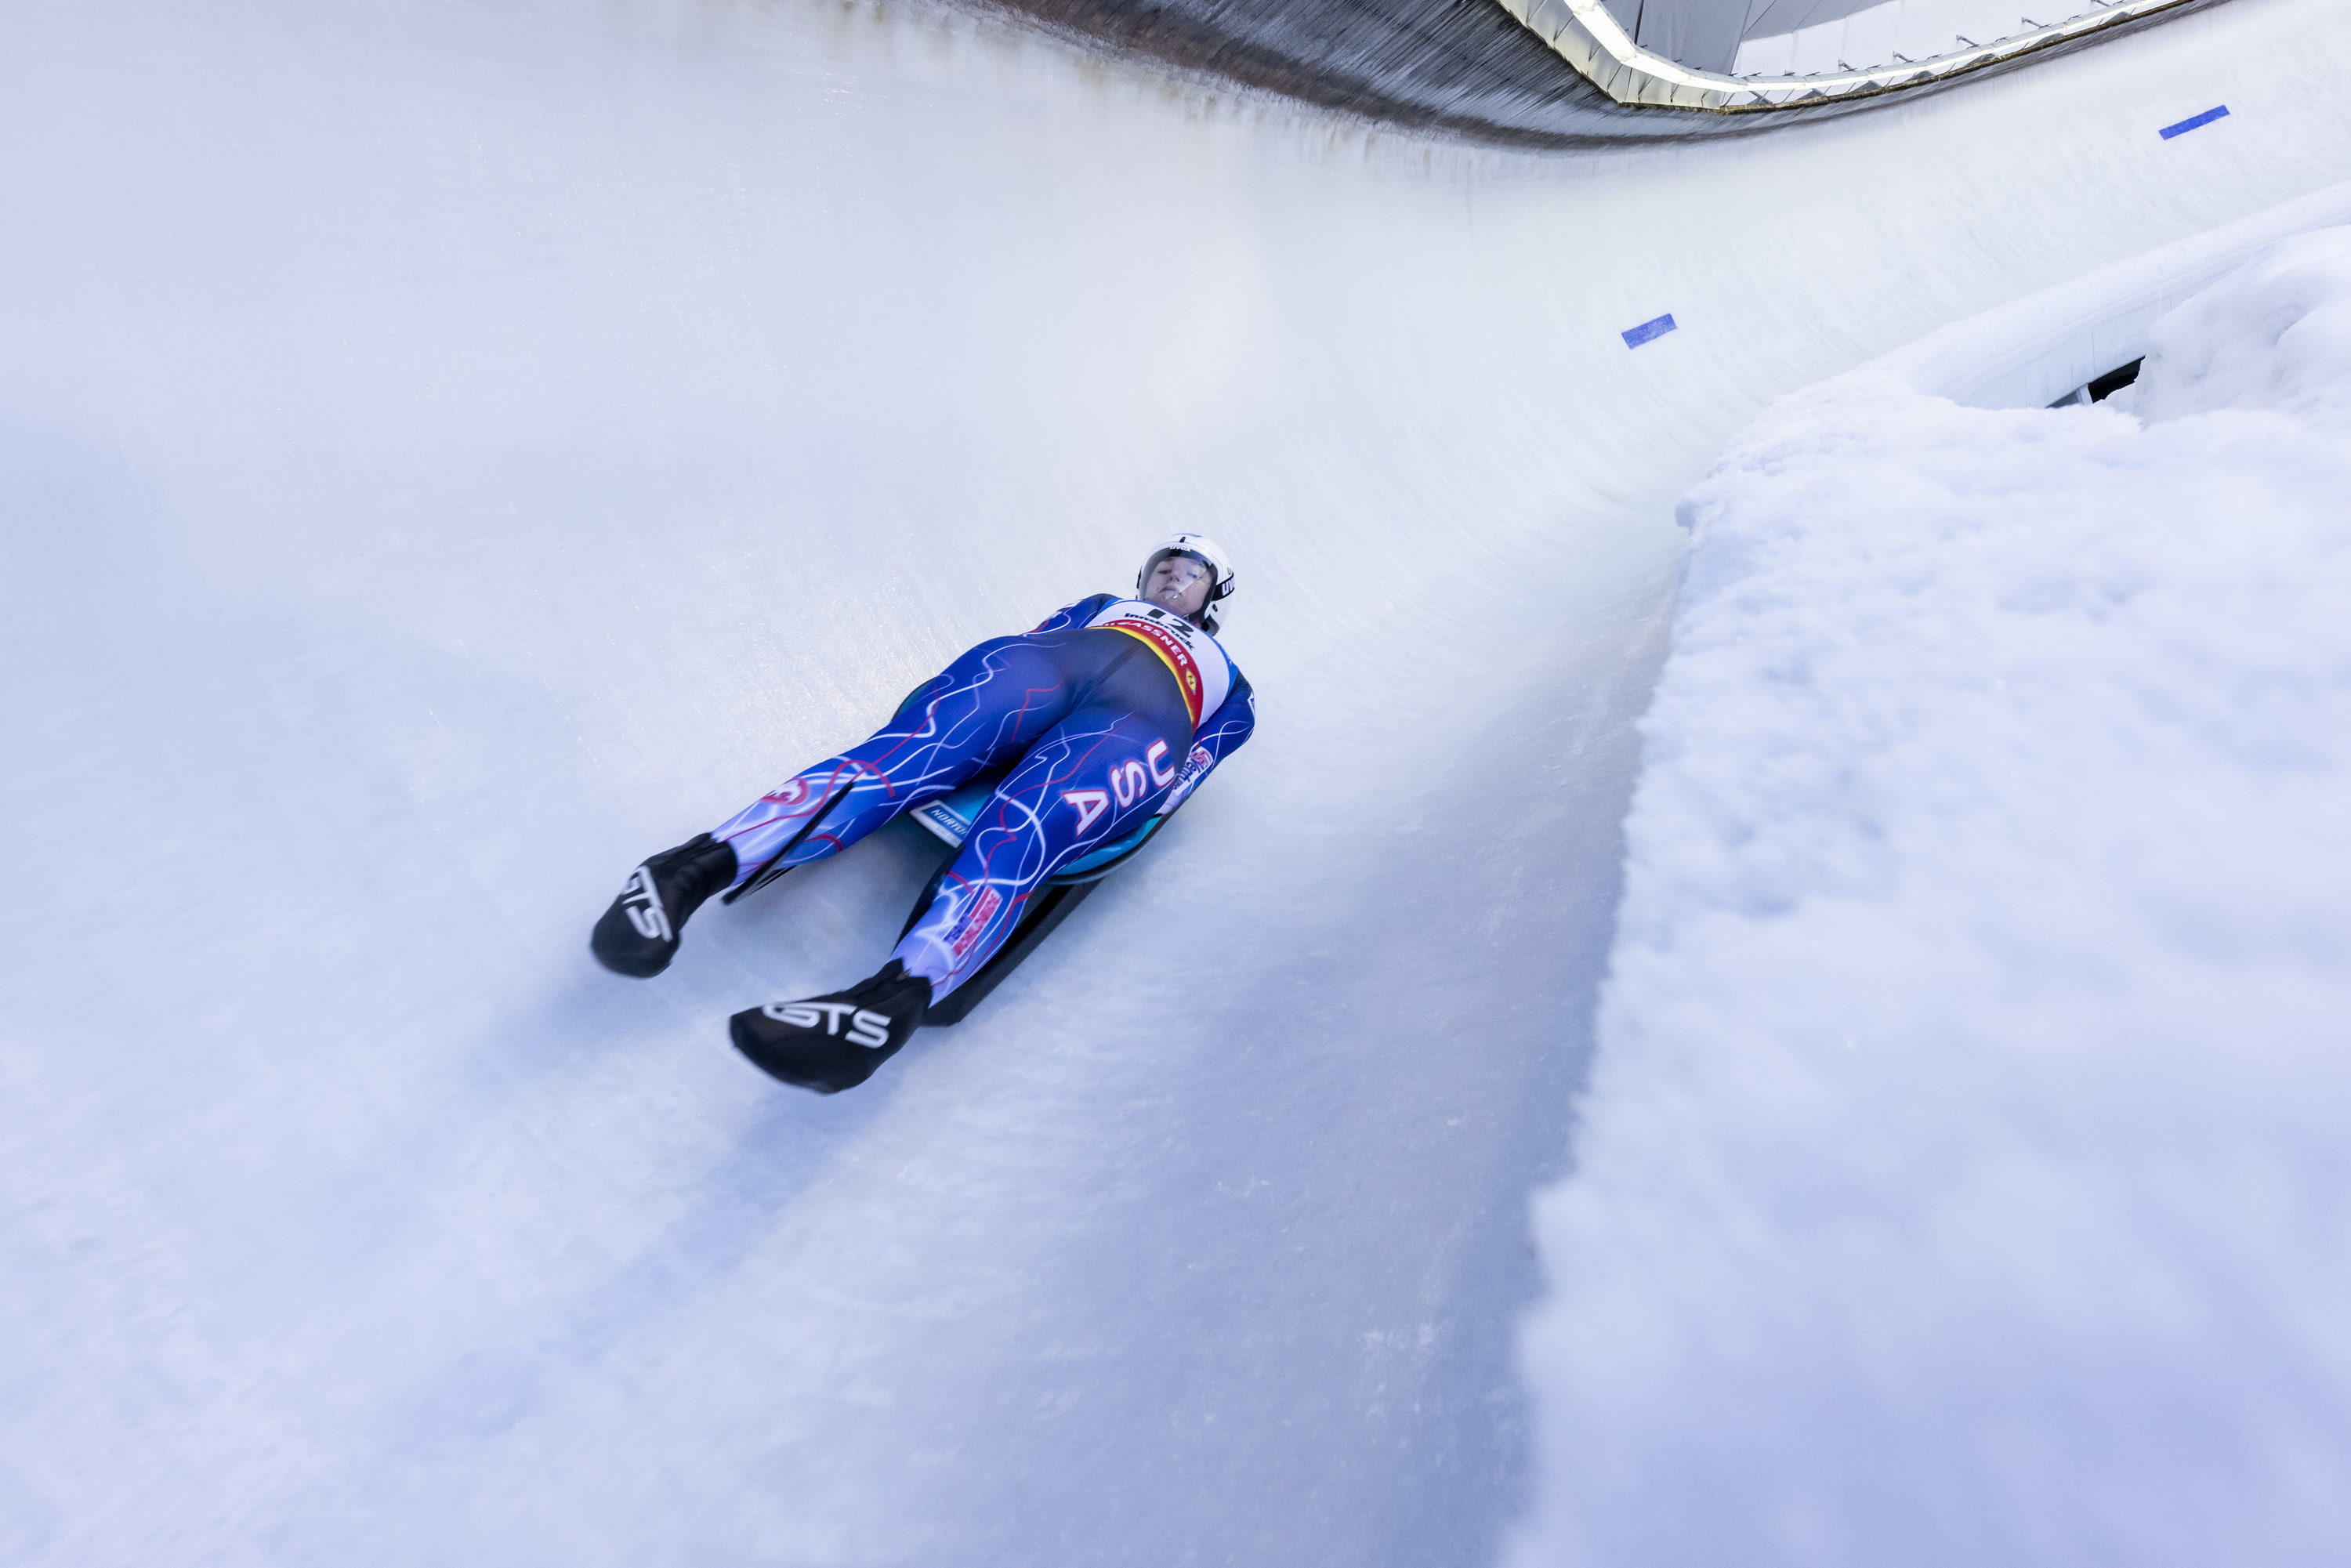 A female athlete competing in the luge at the Olympics